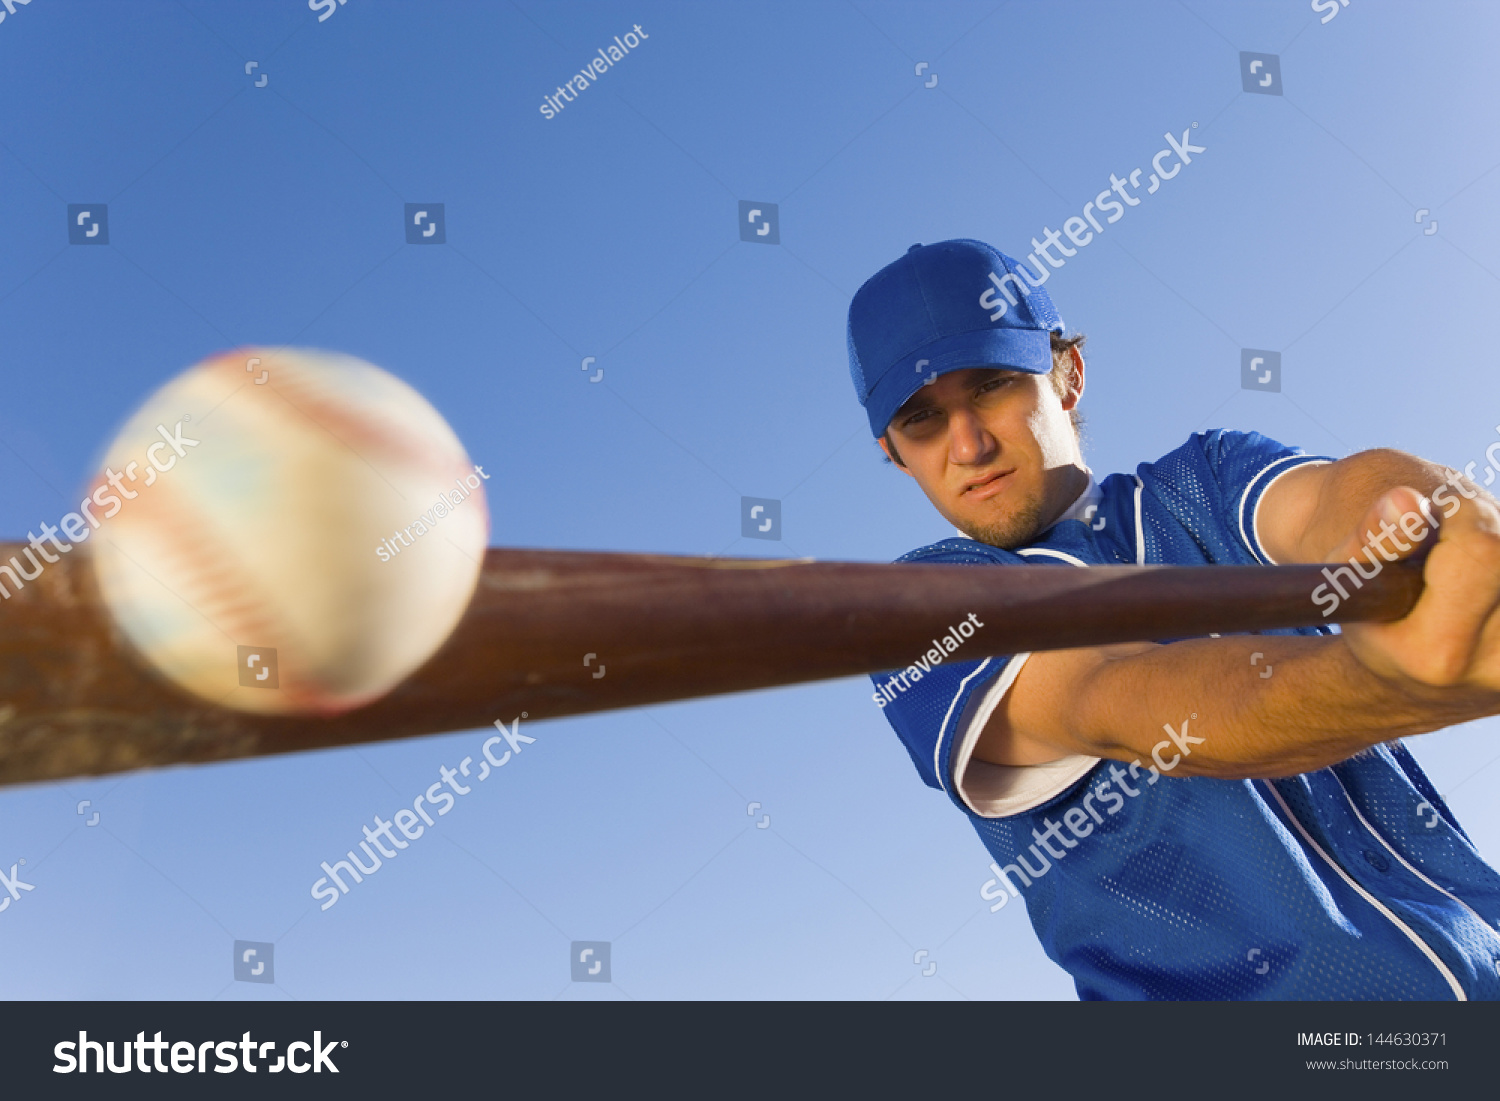 Baseball player hitting the ball with a bat against clear blue sky #144630371